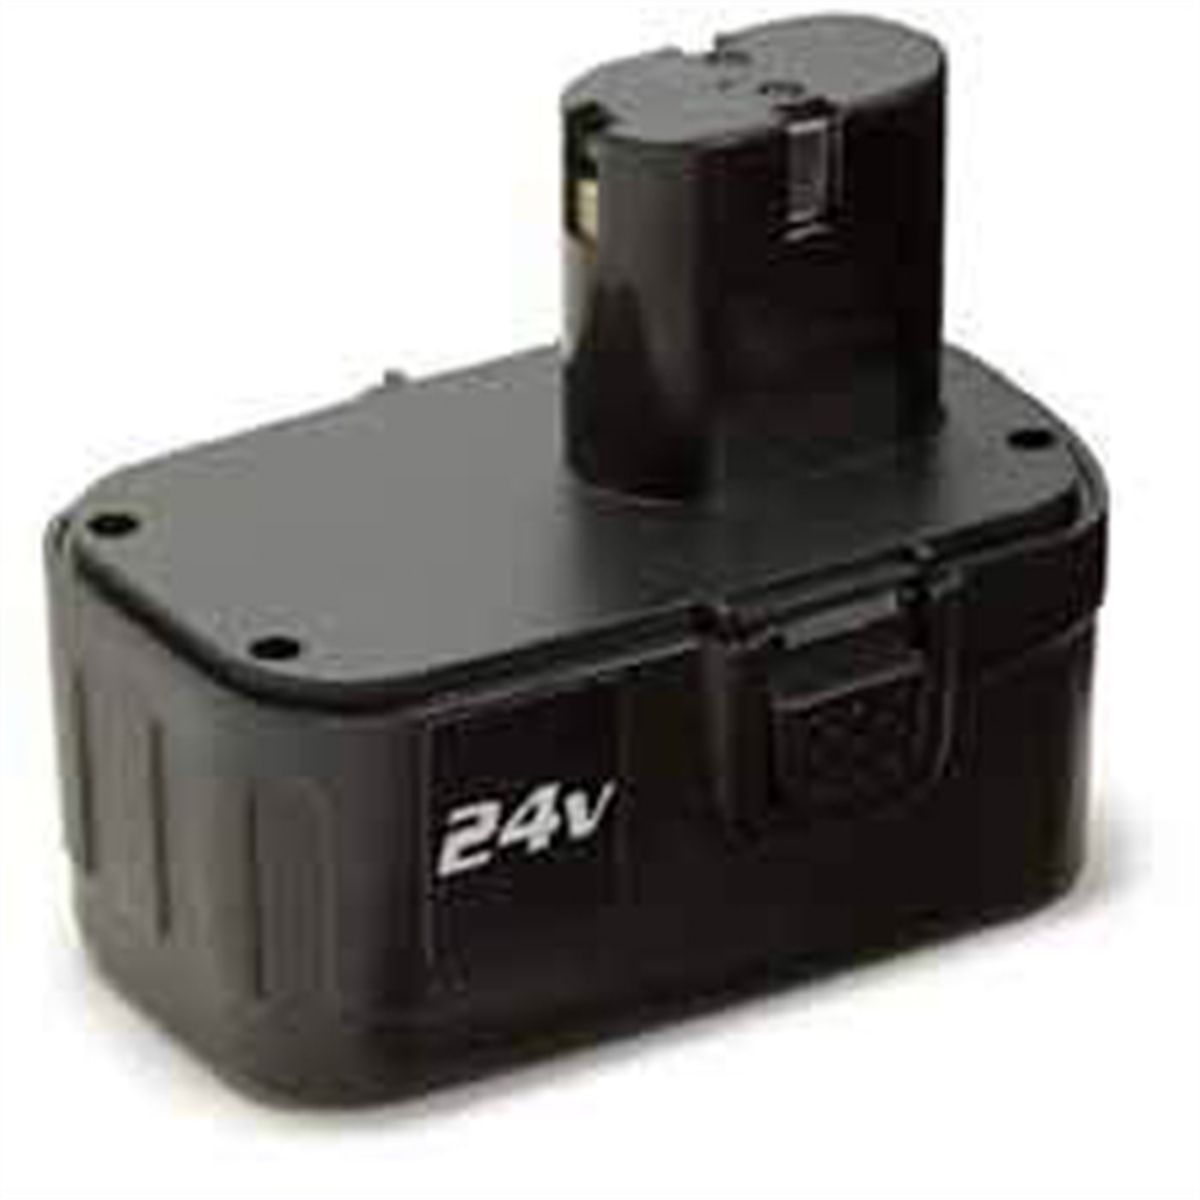 24 Volt Replacement Battery for 22160 Cordless Imp...